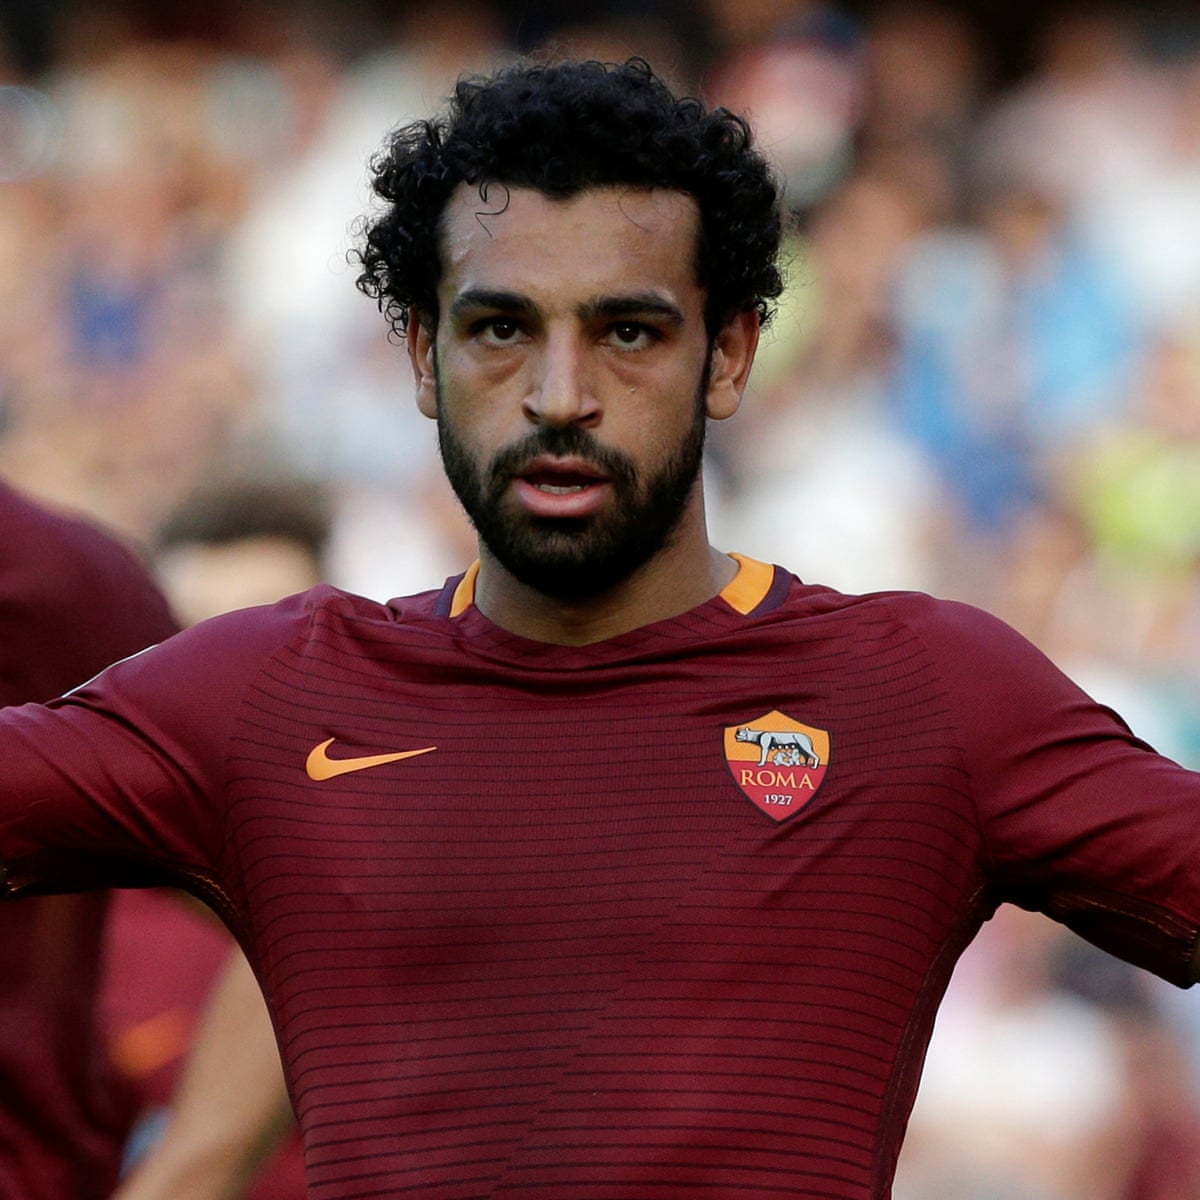 Liverpool to seal Mohamed Salah signing from Roma for £34.3m